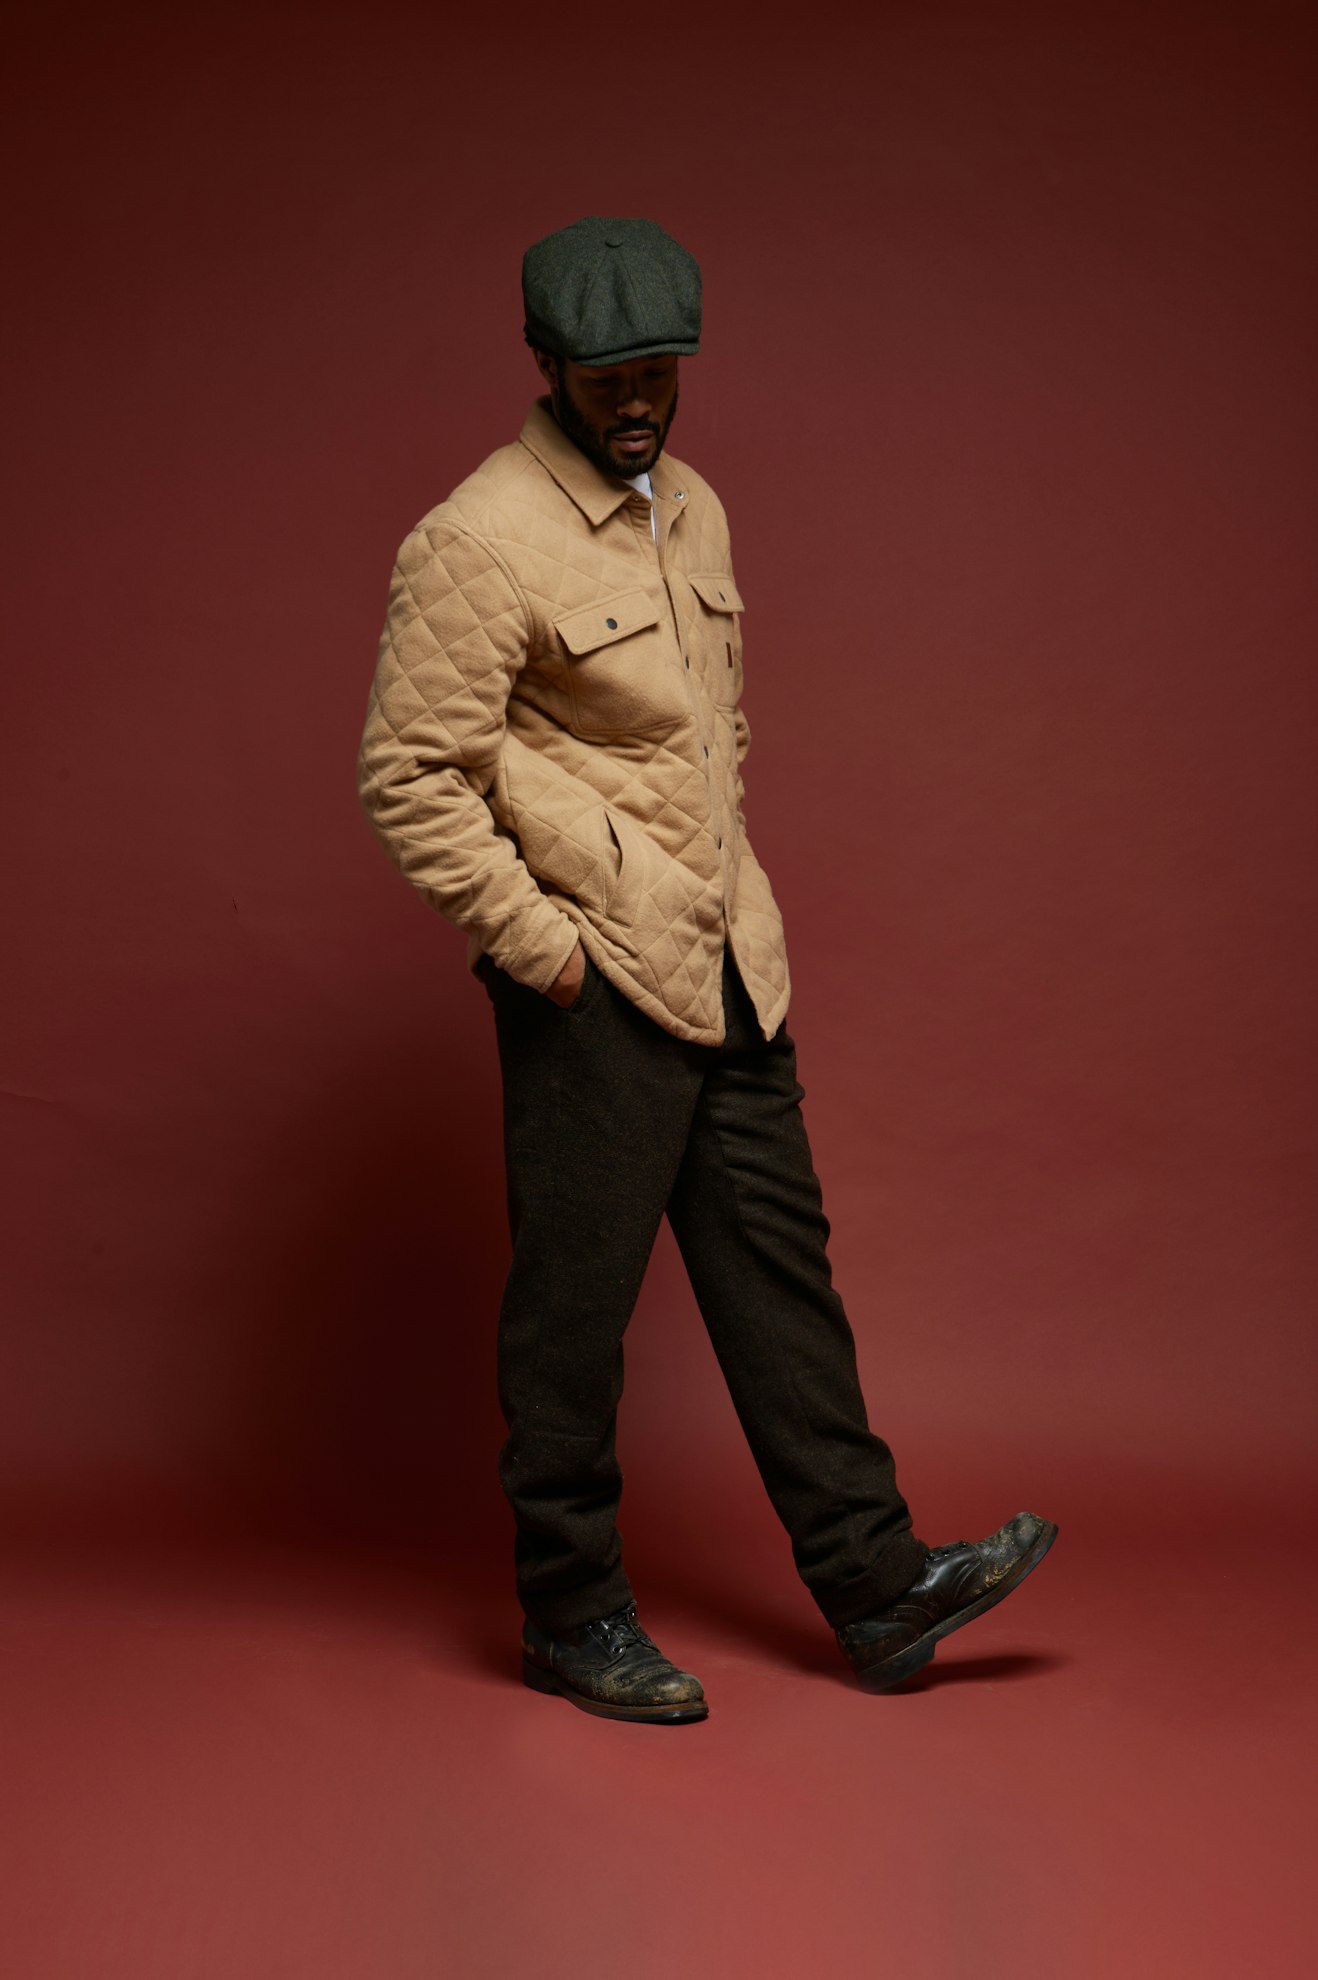 Brixton Men's Jackets, Tops, and Bottoms